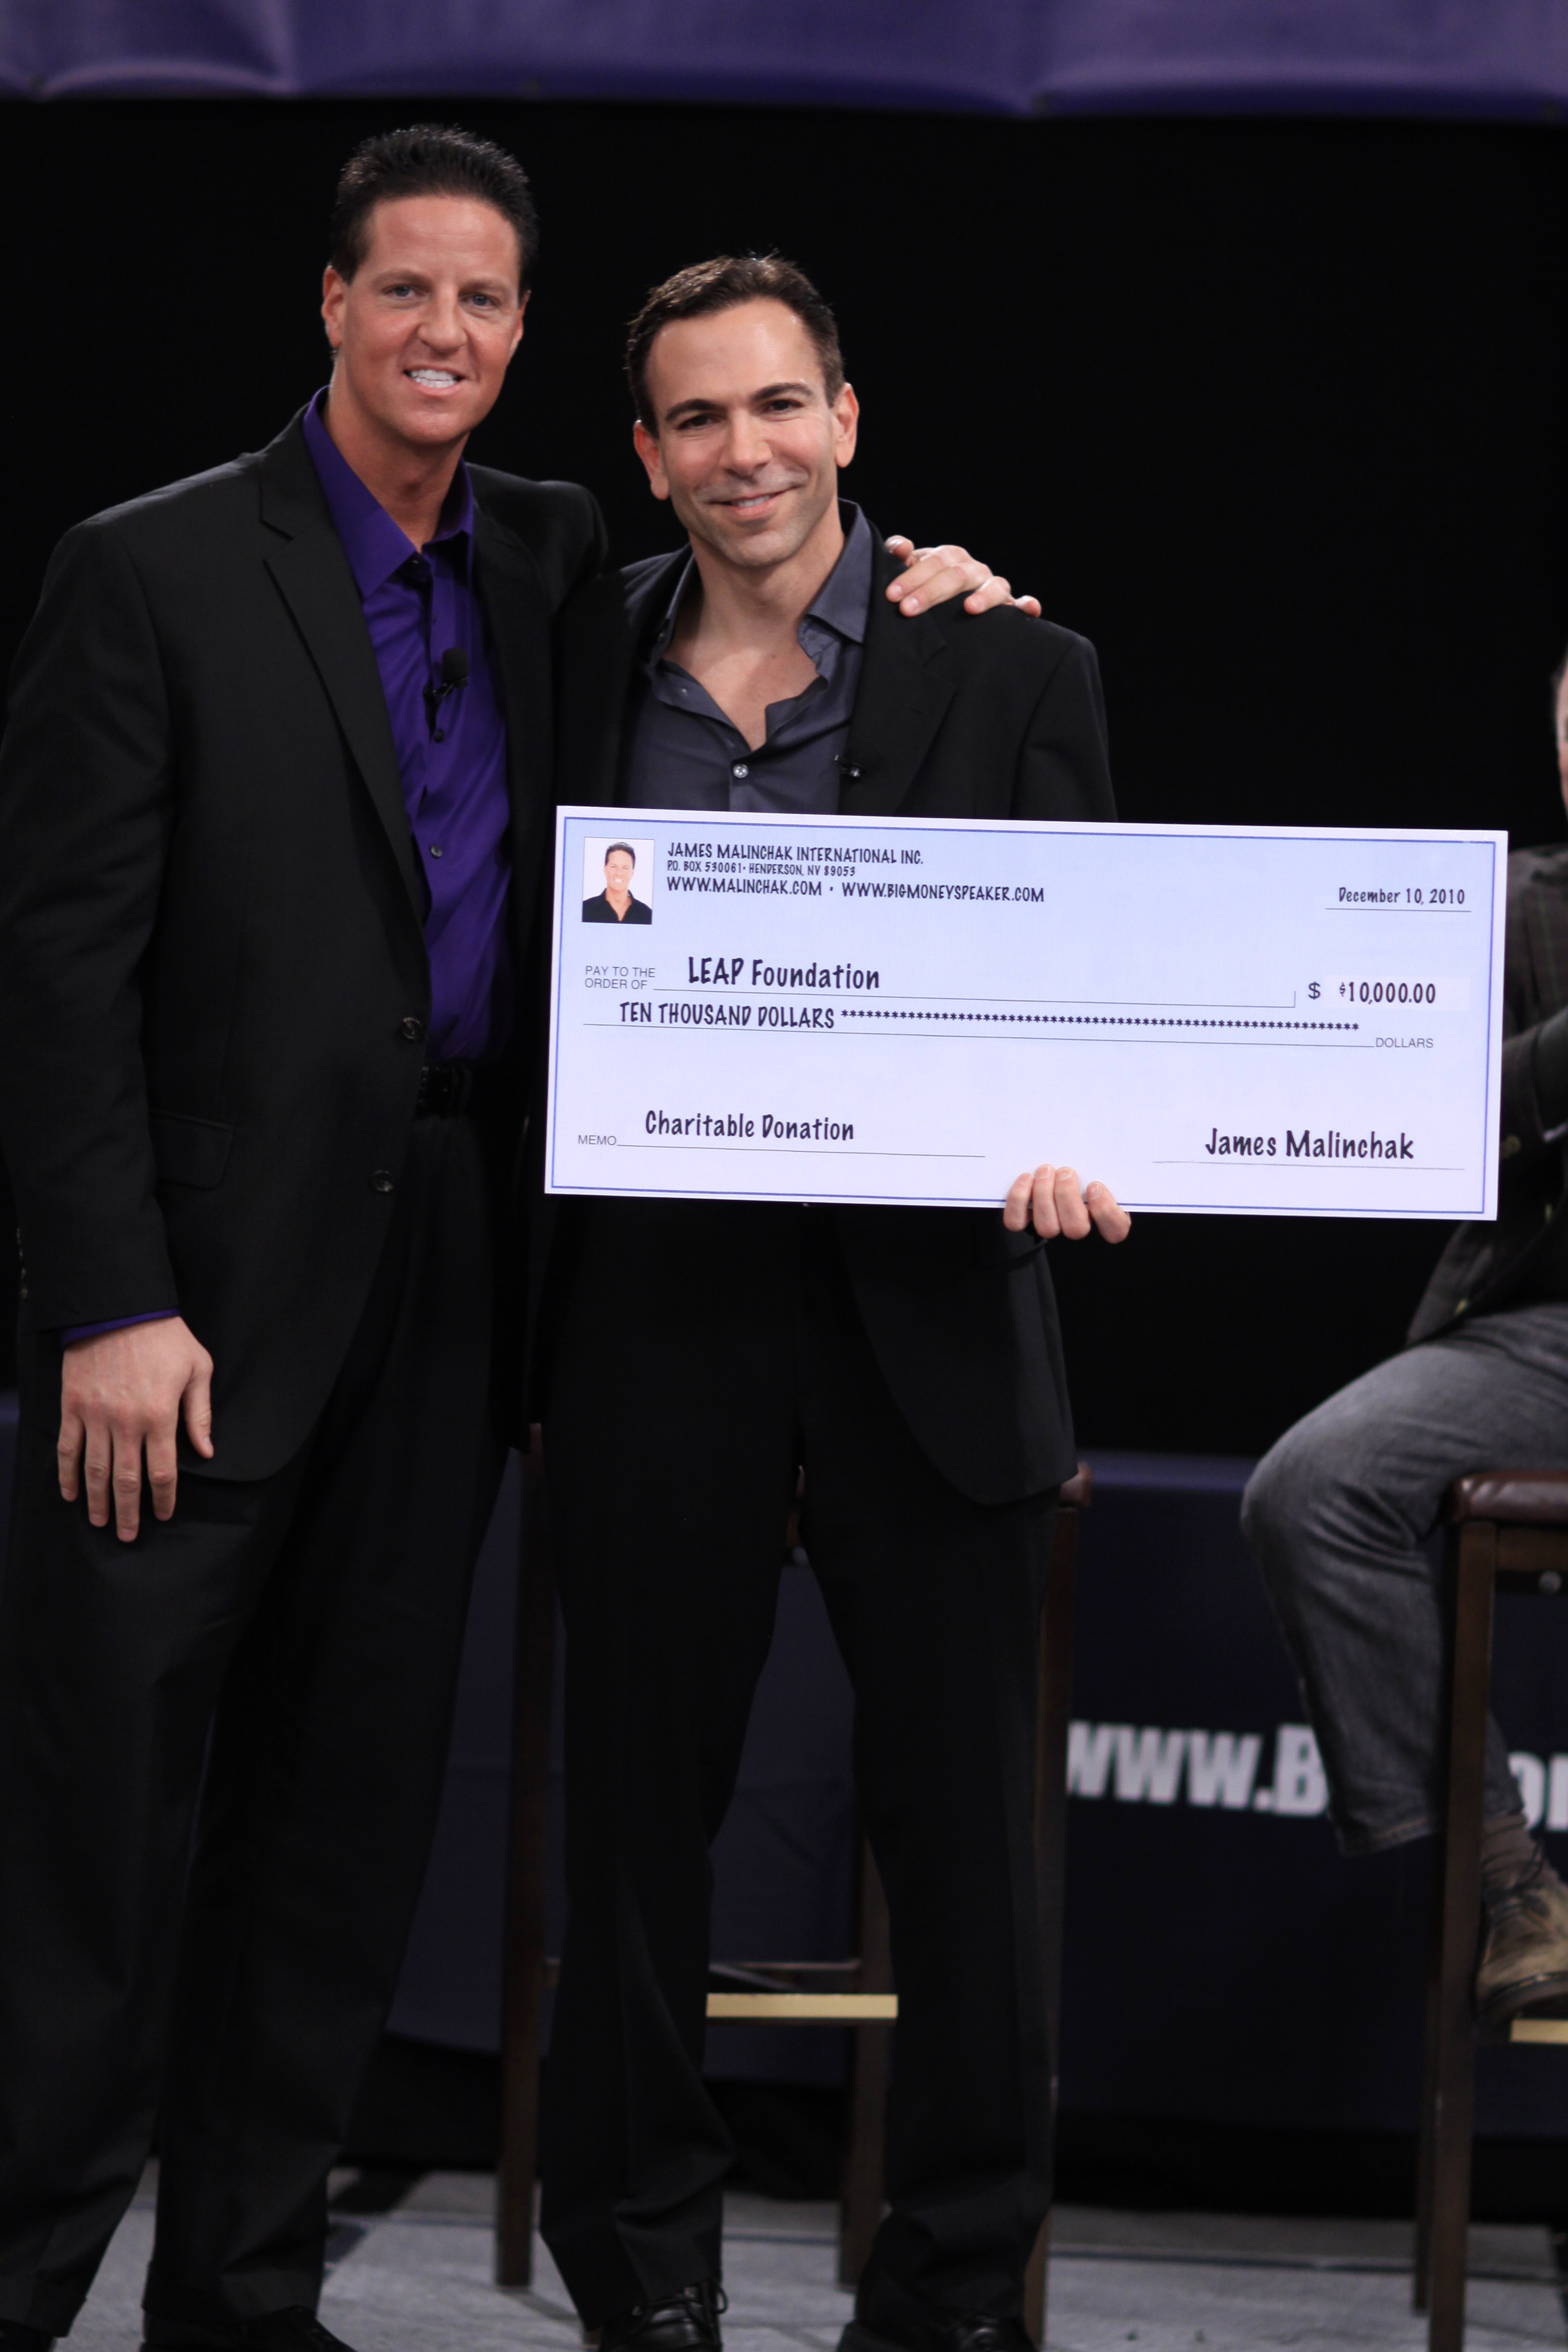 Dr. Bill Dorfman (aka, Dentist to the Stars & on ABCs TV Show Extreme Makeover & CBSs The Doctors) receiving a $10,000 charitable donation from James Malinchak, Featured on ABC's Hit TV Show, Secret Millionaire. James Malinchak is one of Am